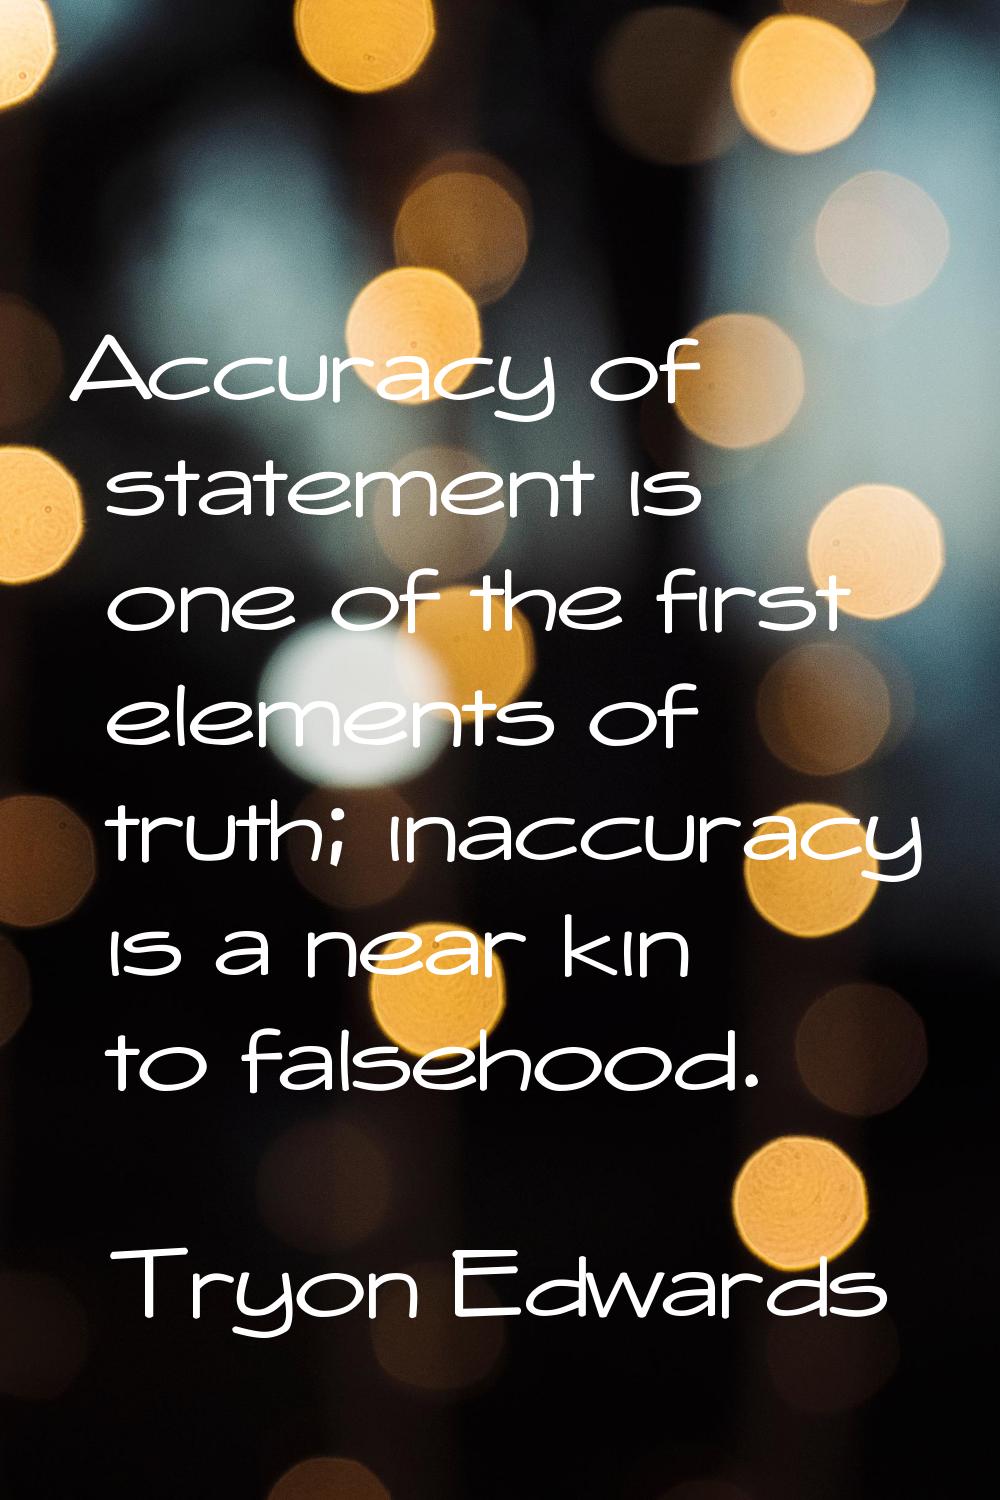 Accuracy of statement is one of the first elements of truth; inaccuracy is a near kin to falsehood.